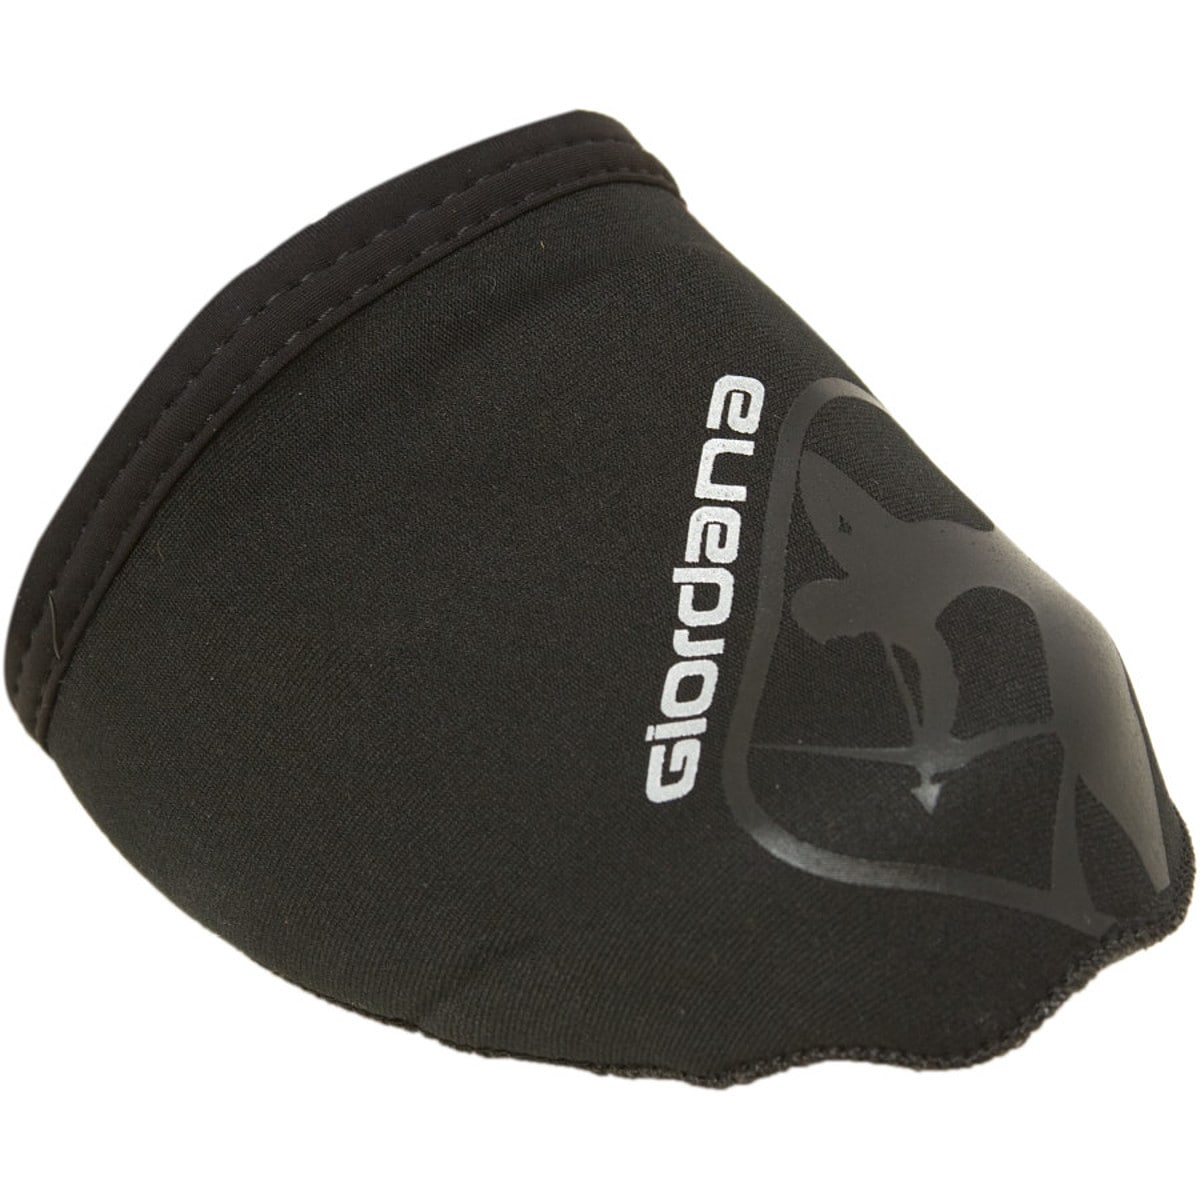 Giordana Toester Shoes Toe Covers Black, L